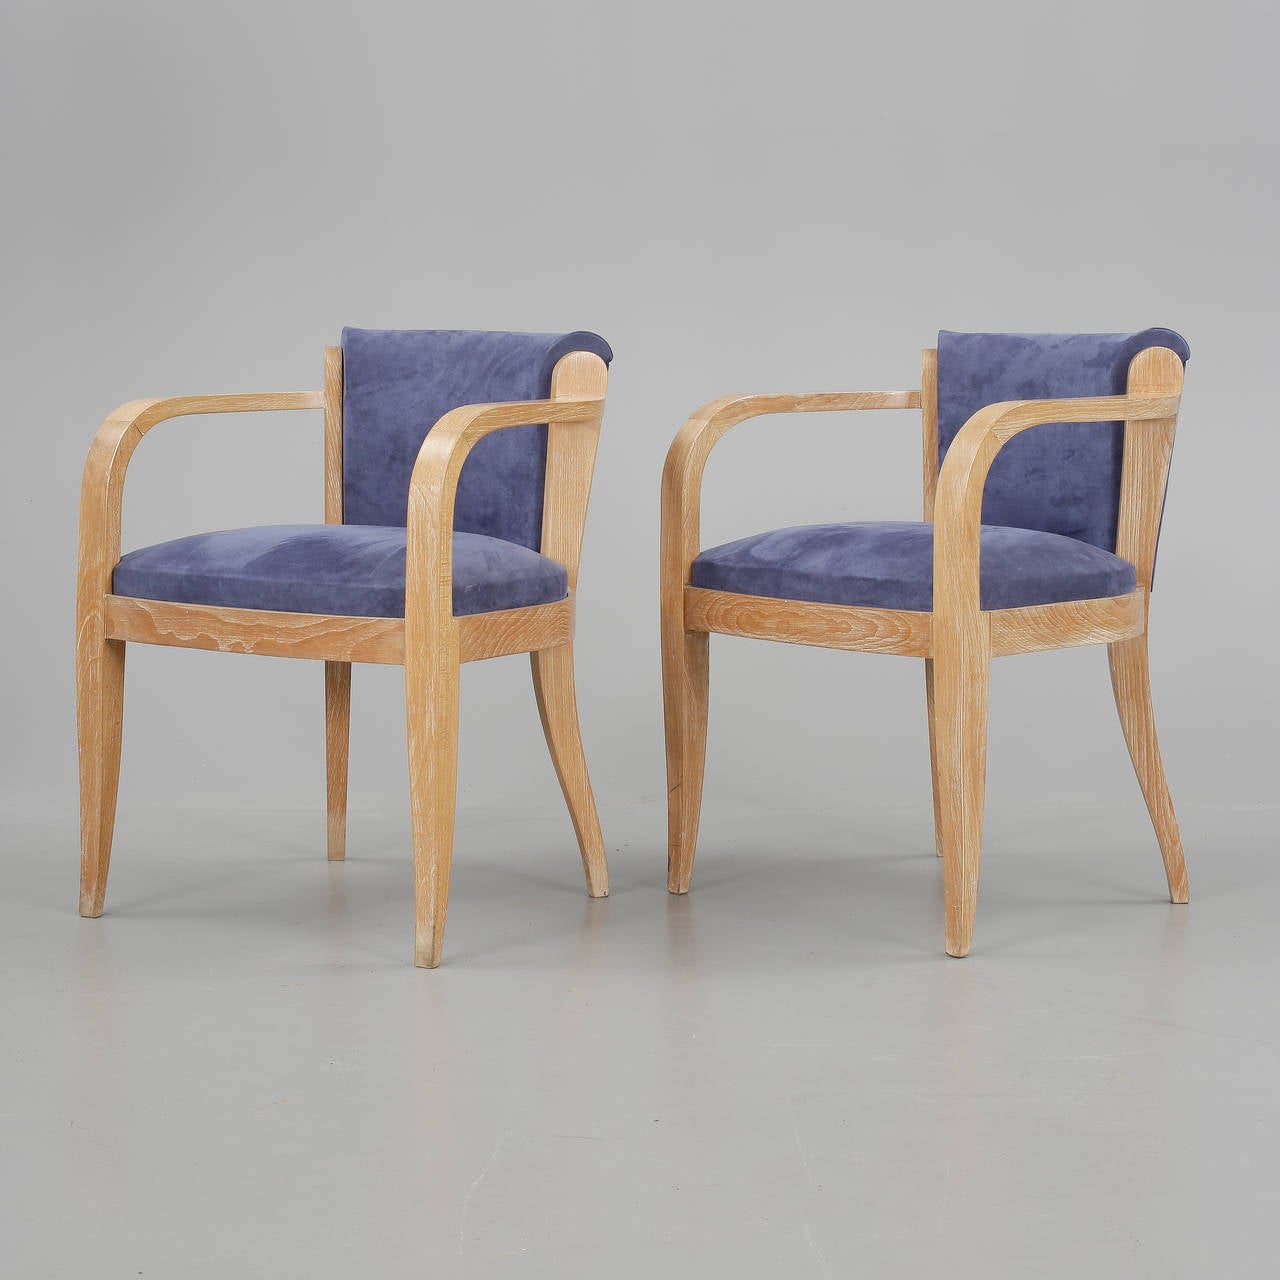 A pair of French armchairs, circa 1940s.
Faux Cerused Oak finish and suede upholstery.